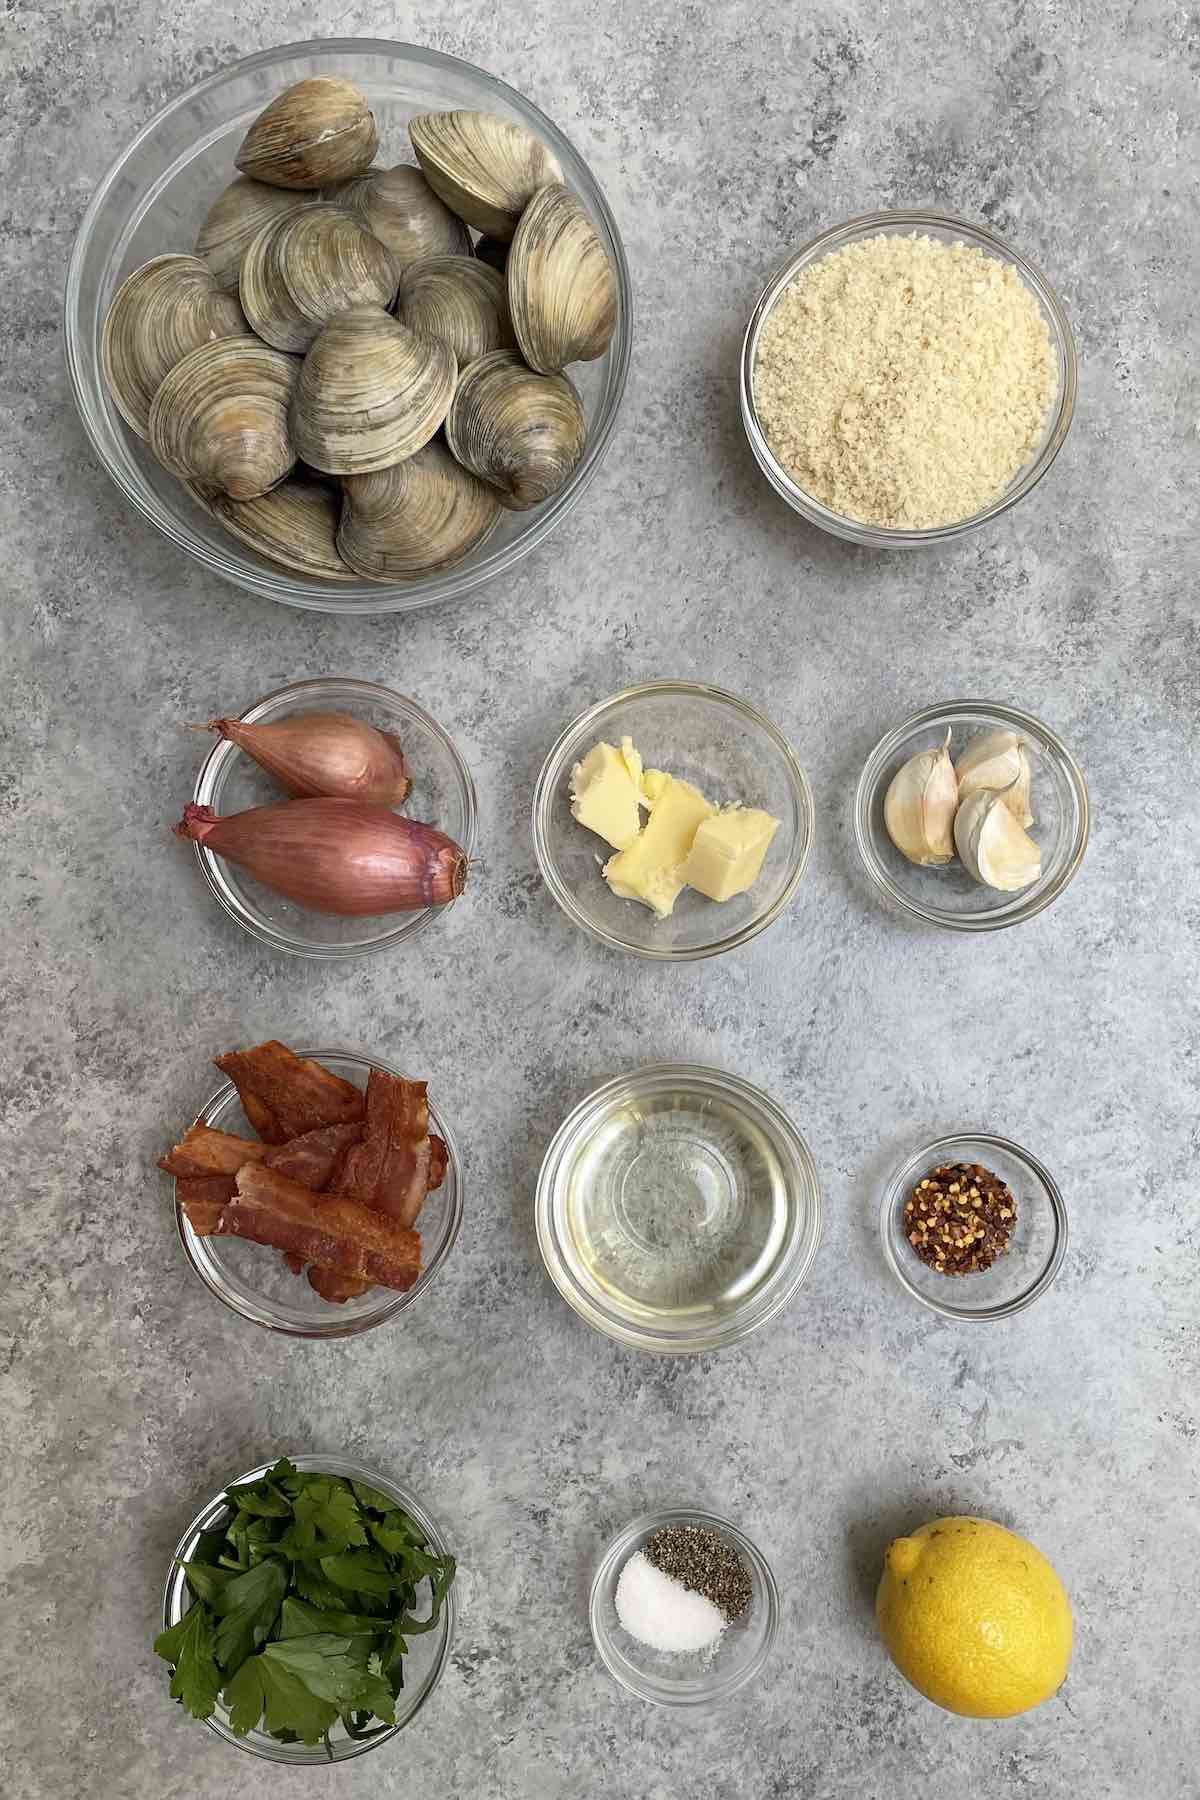 Ingredients for clams casino